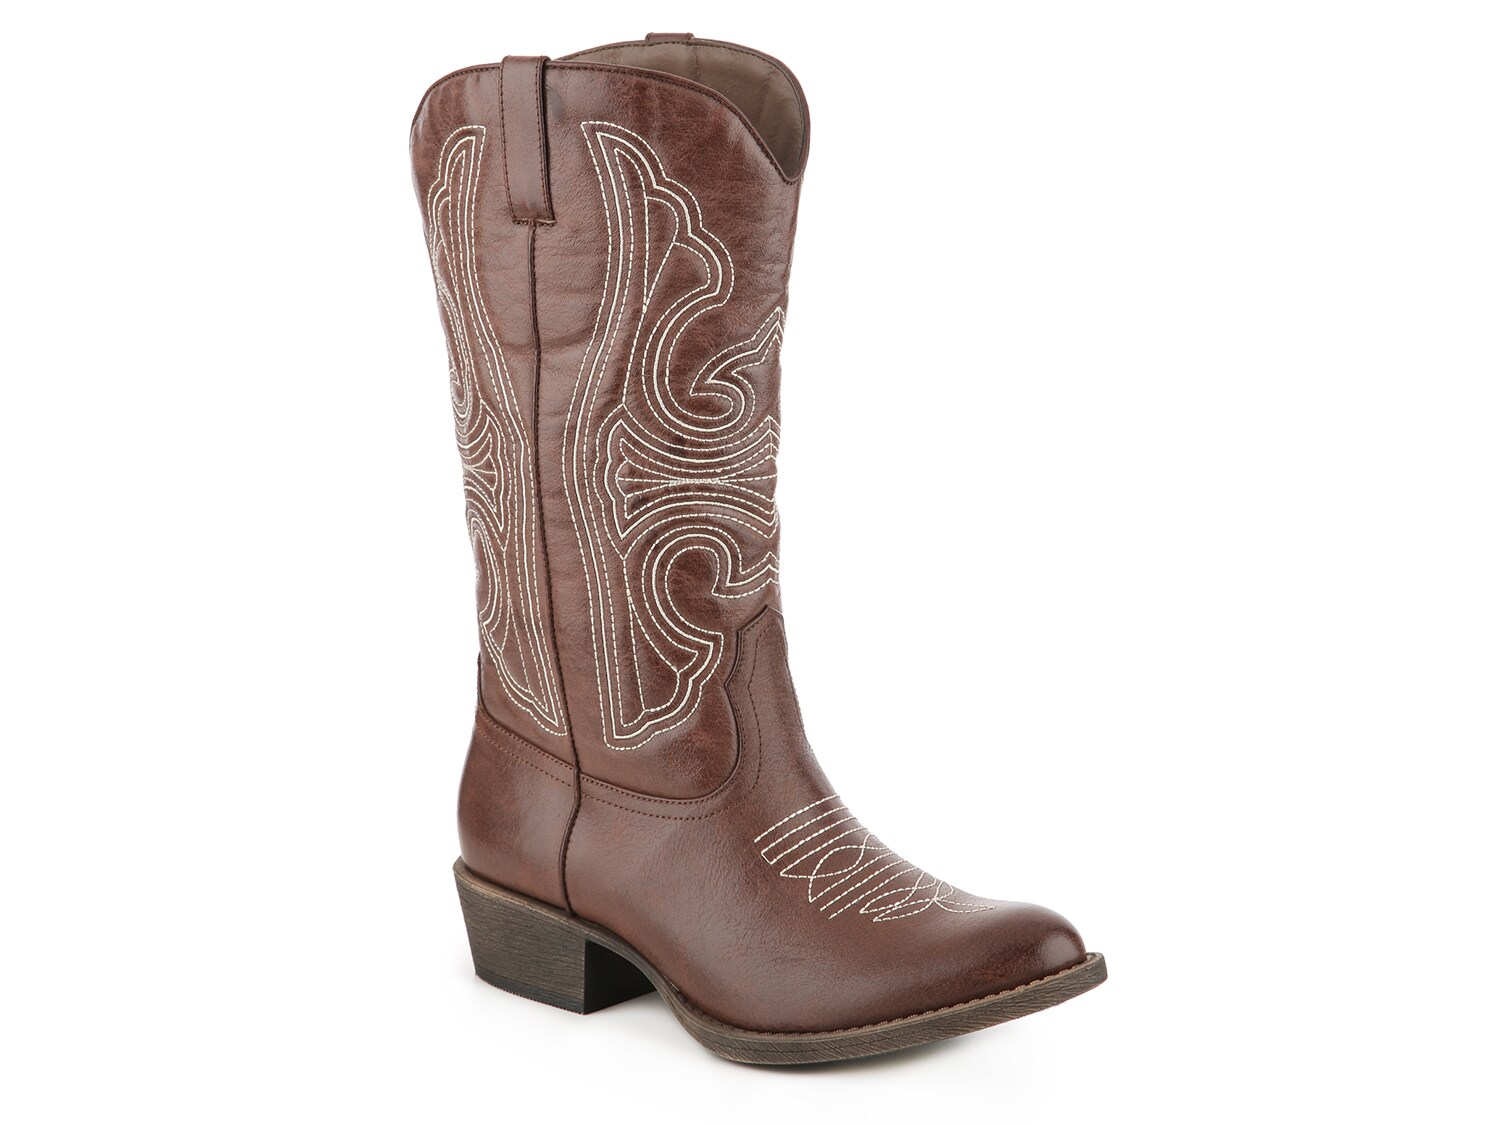 coconut boots dsw